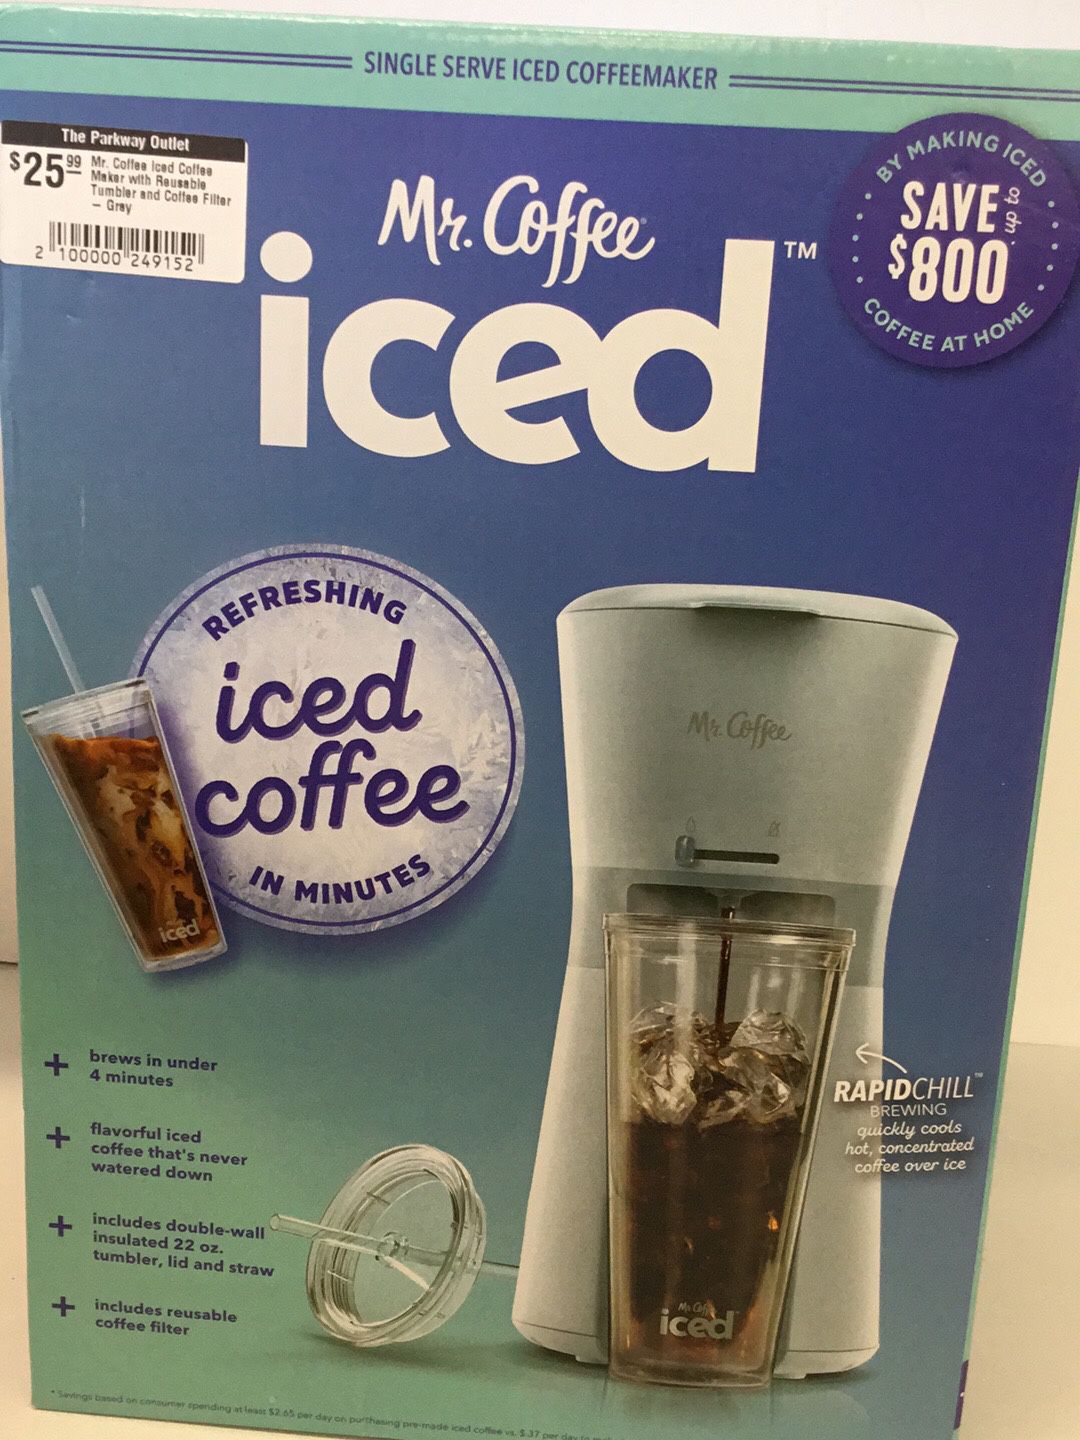 https://offerup.com/redirect/?o=TXIuY29mZmVl Iced Coffee Maker With Reusable Tumbler And Coffee Filter 